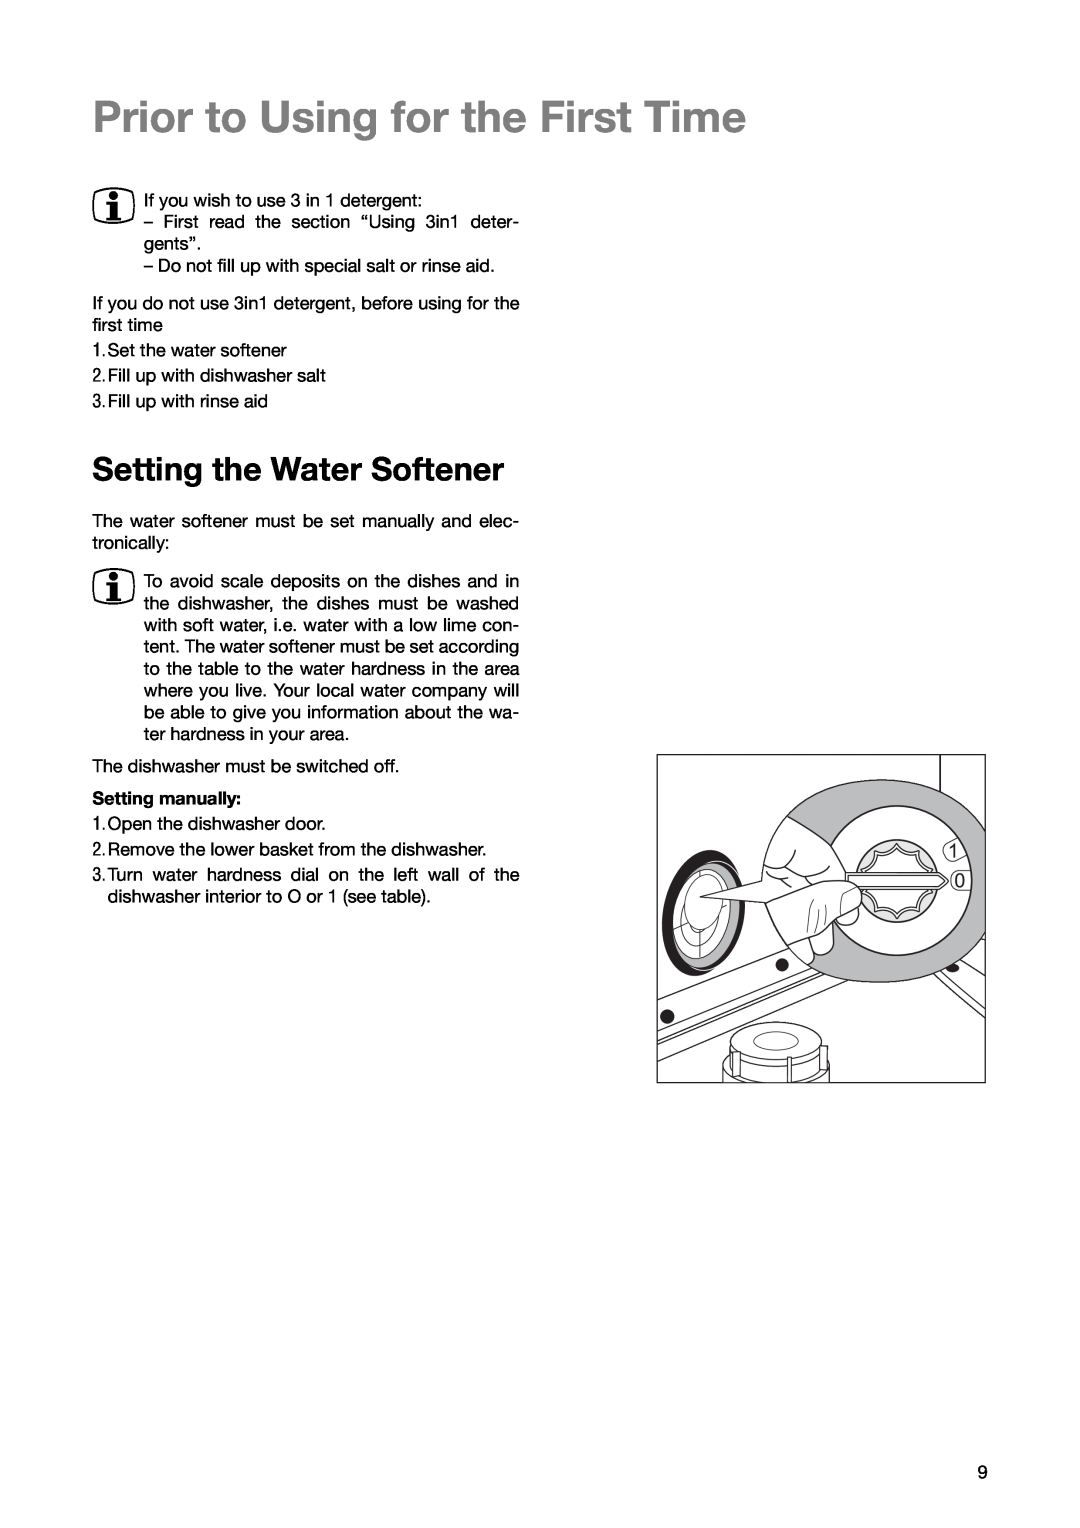 Zanussi ZSF 6171 manual Prior to Using for the First Time, Setting the Water Softener 